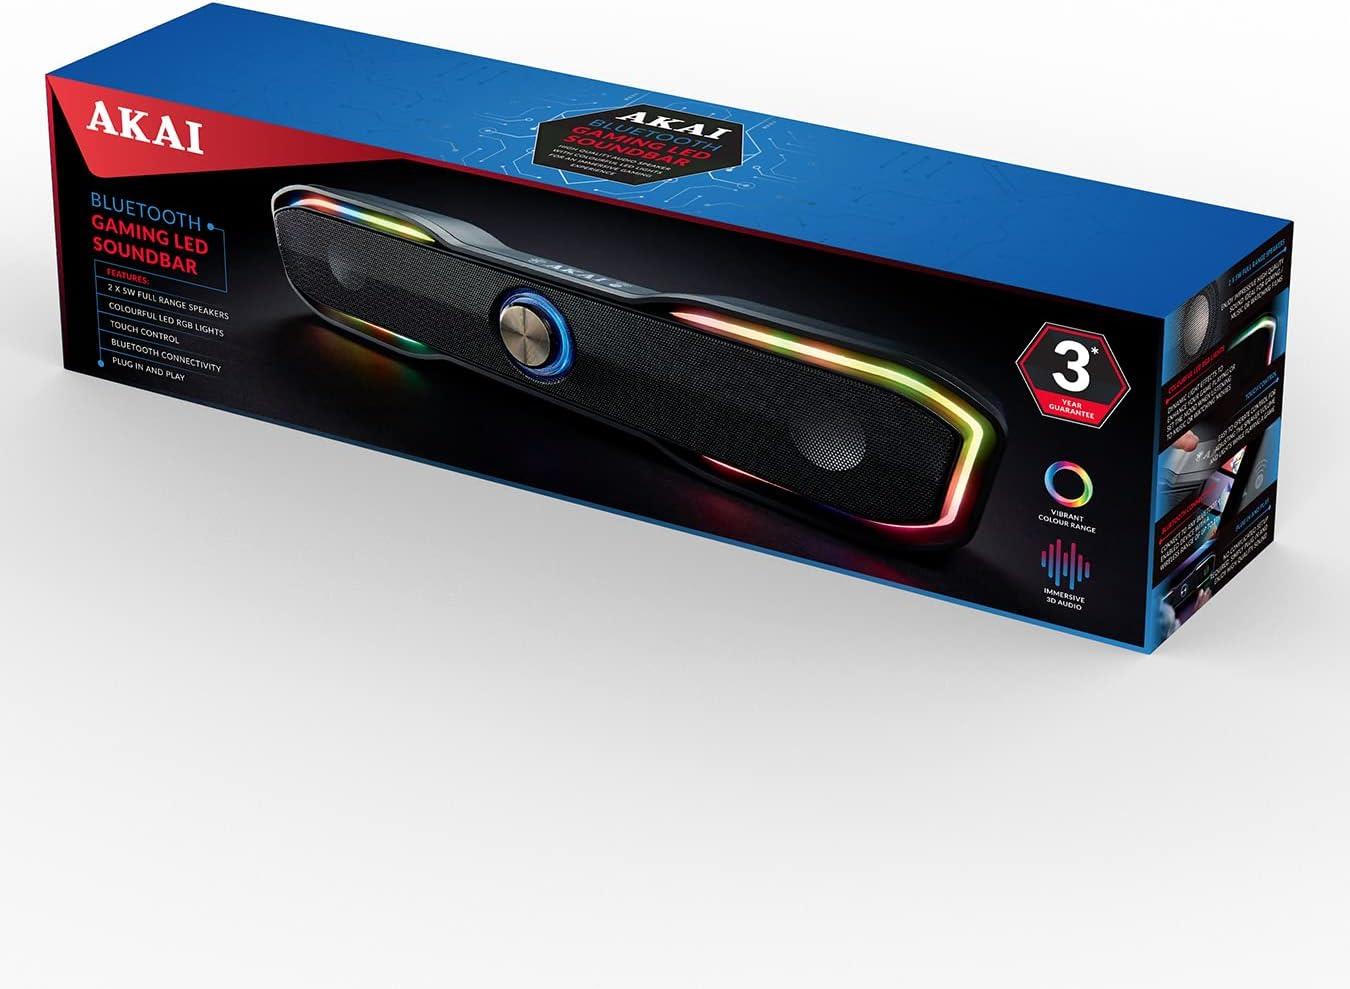 AKAI Bluetooth Gaming LED Soundbar, Colourful LED Light Effects, Bluetooth Connectivity For All Media Players- Games Consoles/Smart TVs, Black